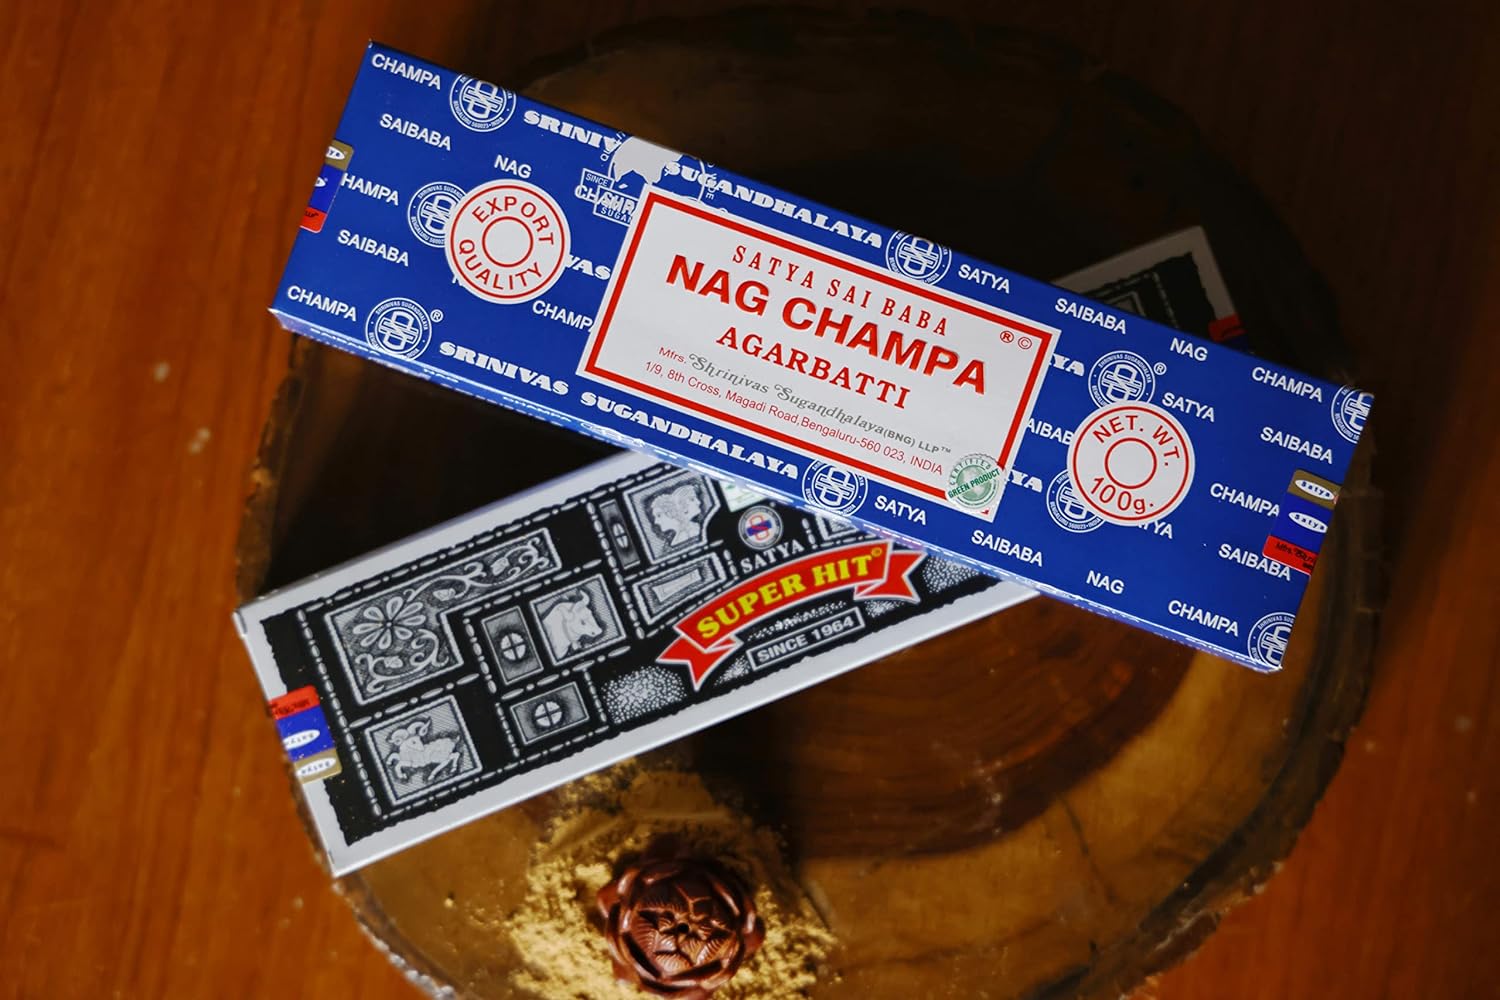 EARTH Satya Nag Champa Premium Incense Sticks 250 GMS (Green Certified) - Naturally Hand Rolled Agarbatti- Perfect for Worshipping, Church, Aroma Therapy, Relaxation, Positivity,Yoga